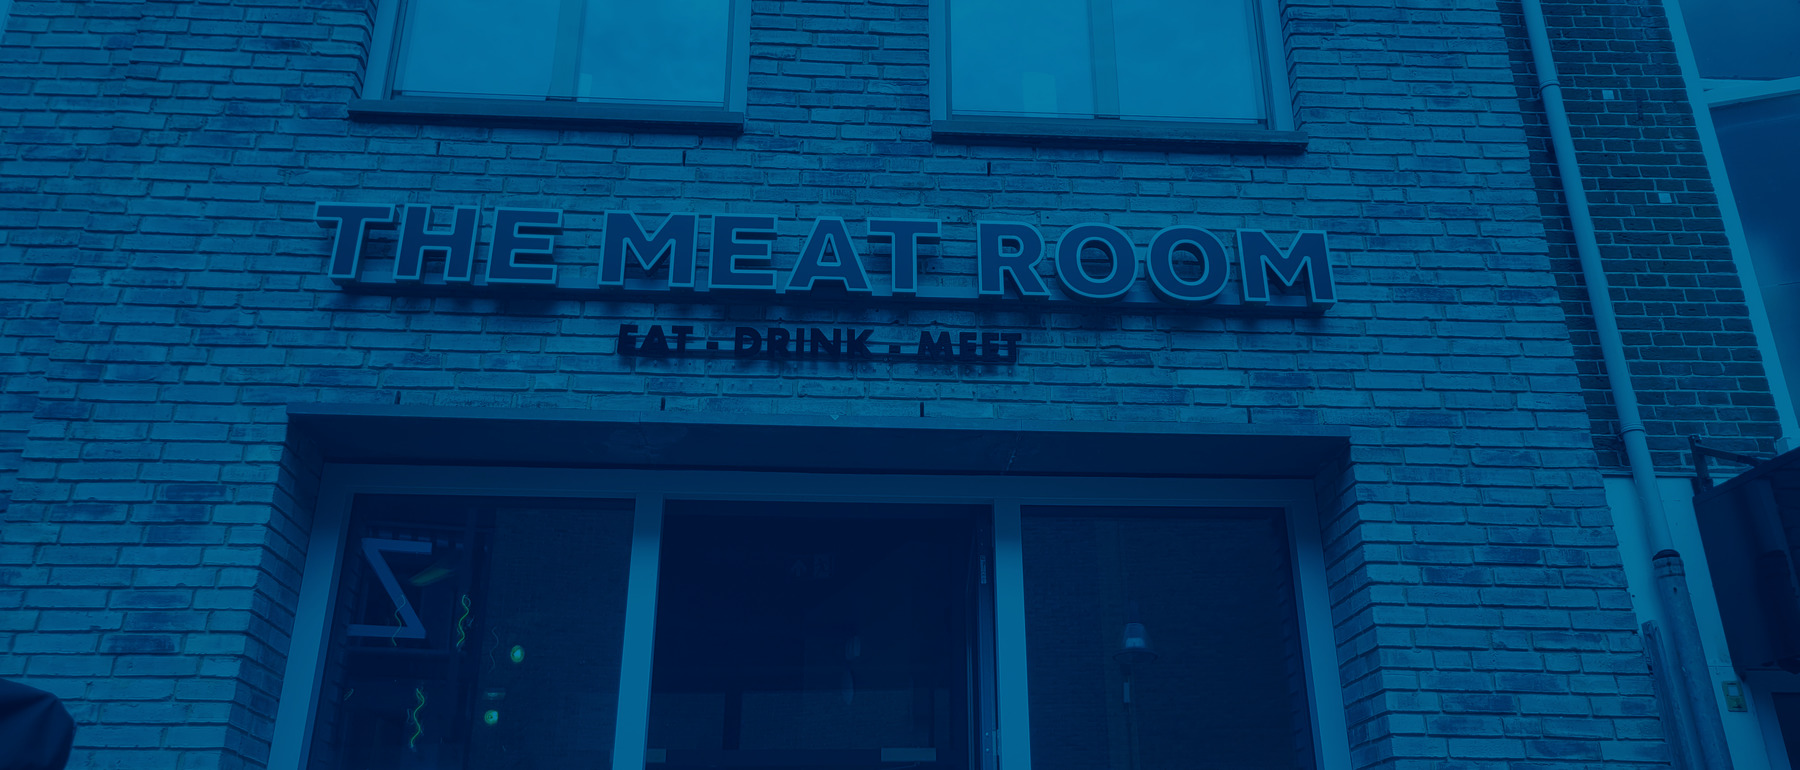 Verbouwing restaurant The Meat Room